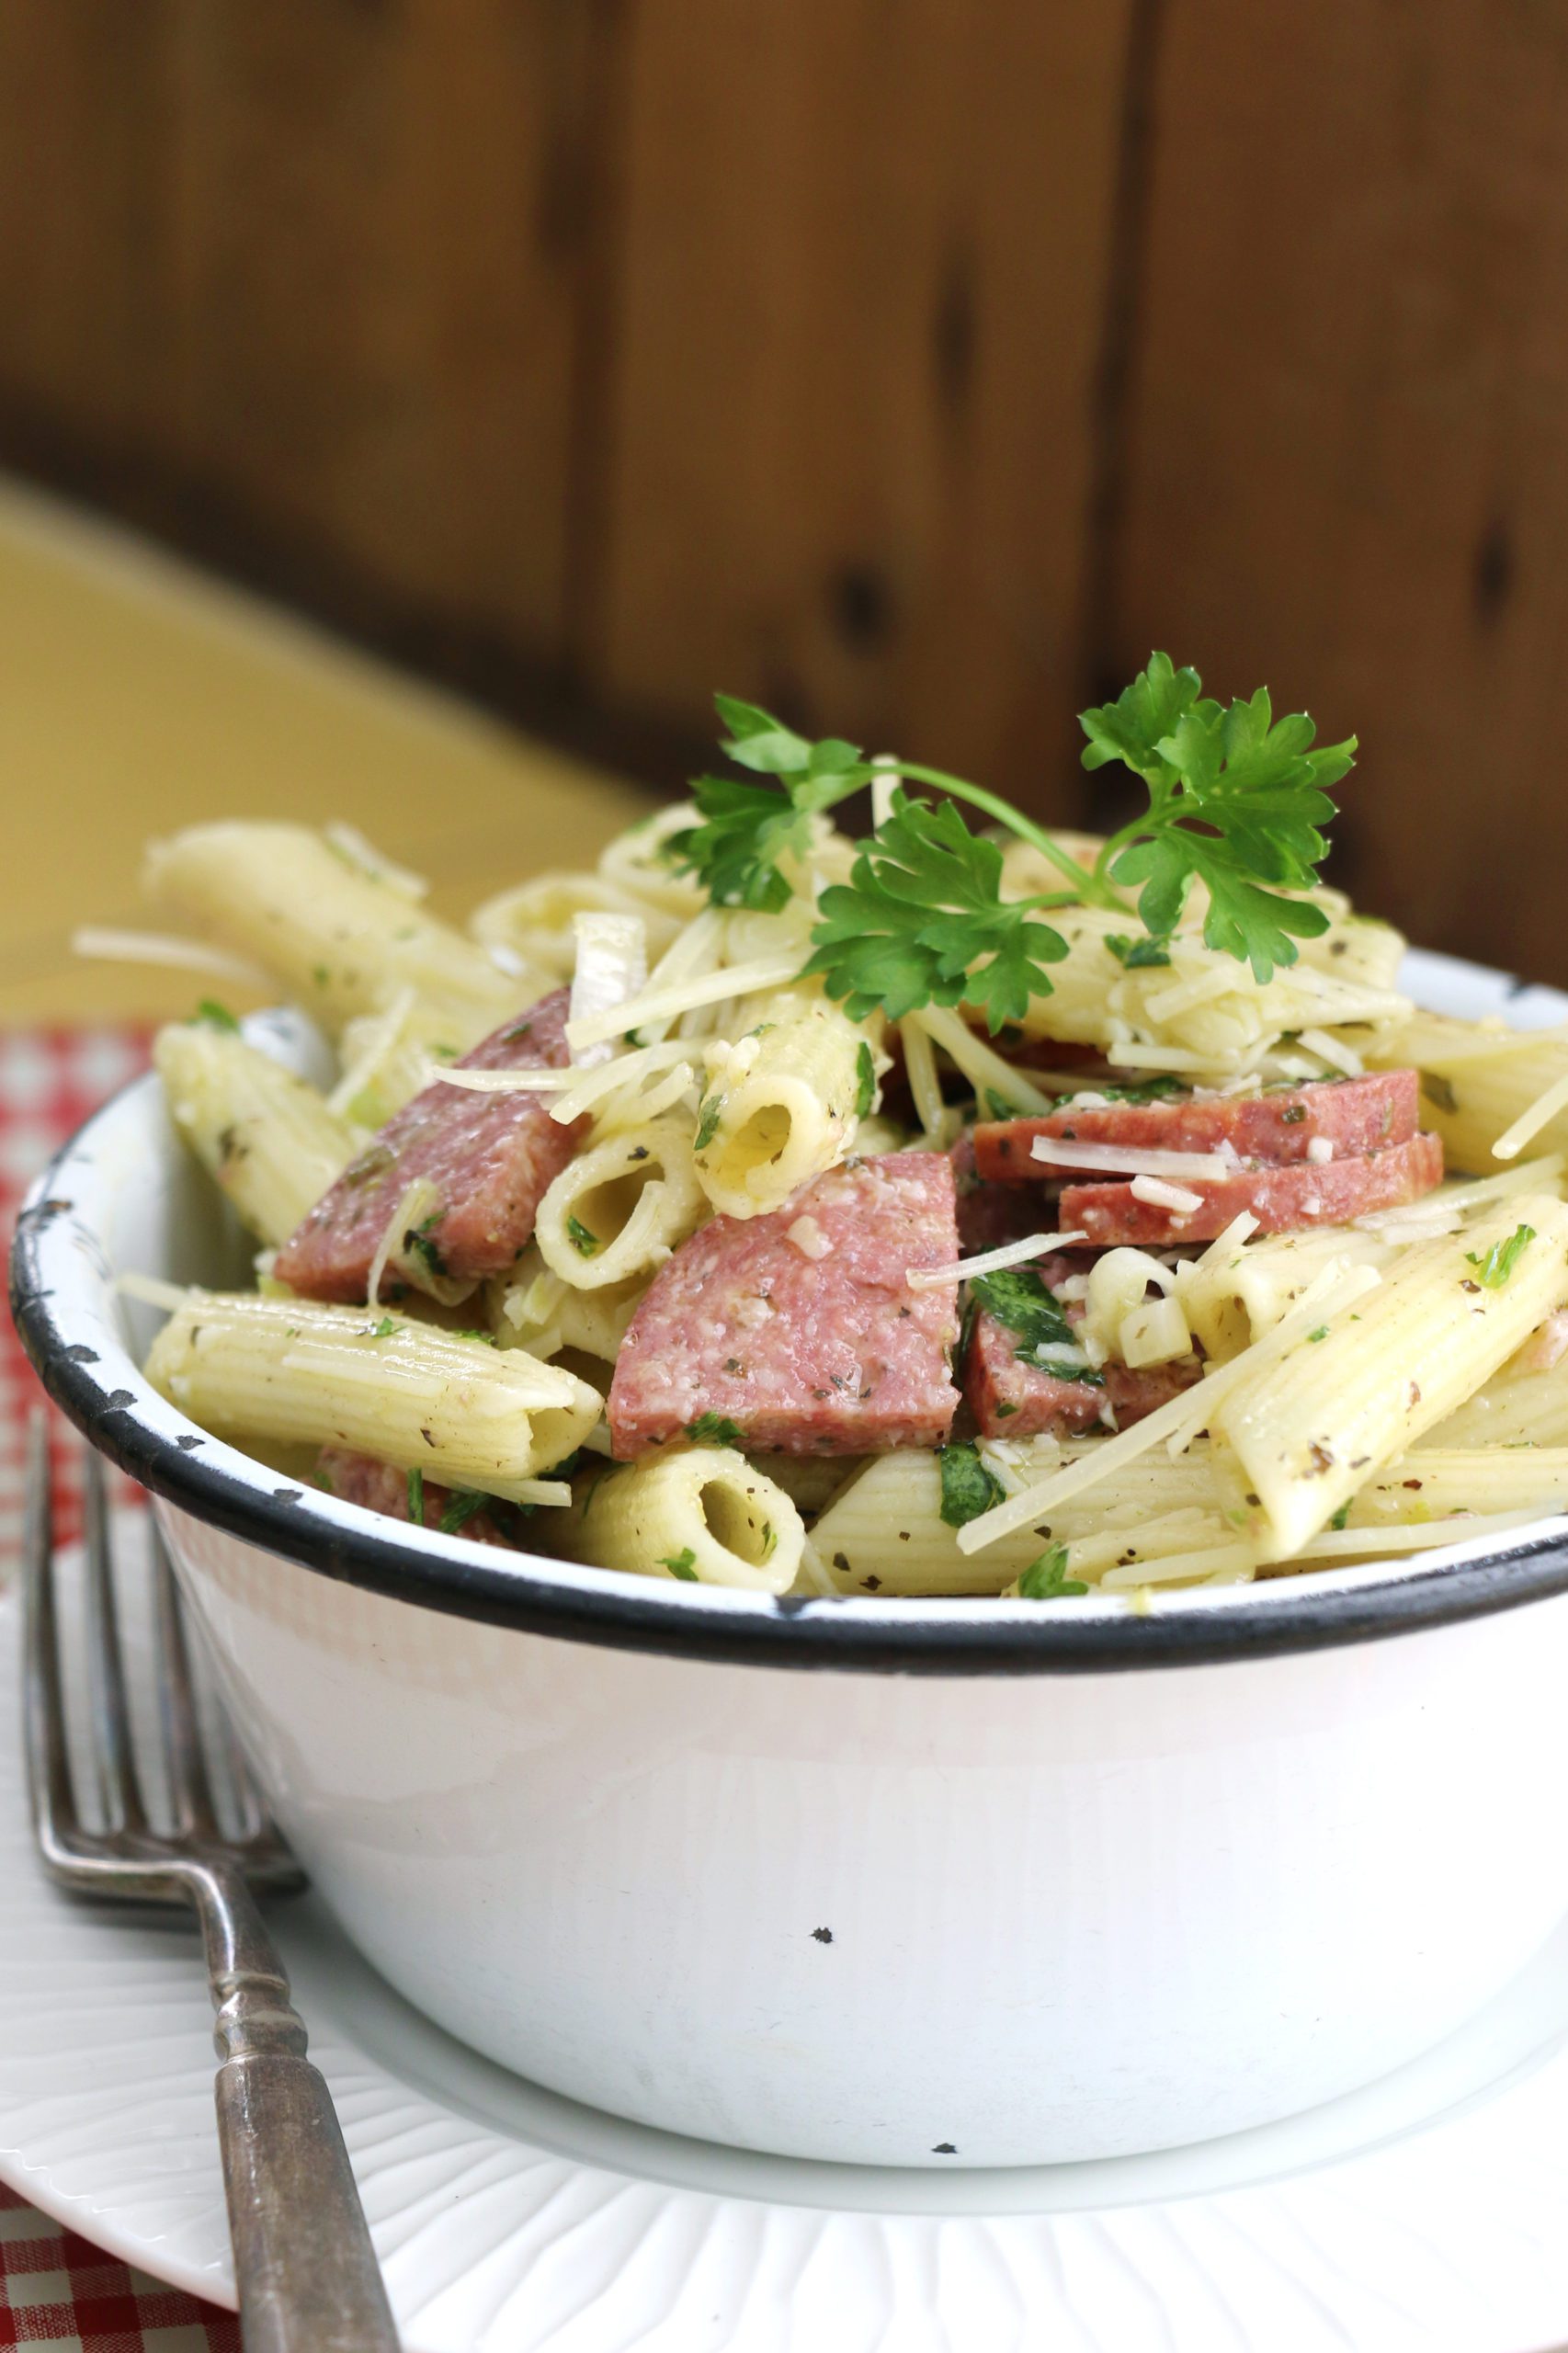 bowl of cold penne pasta salad with summer sausage or salami